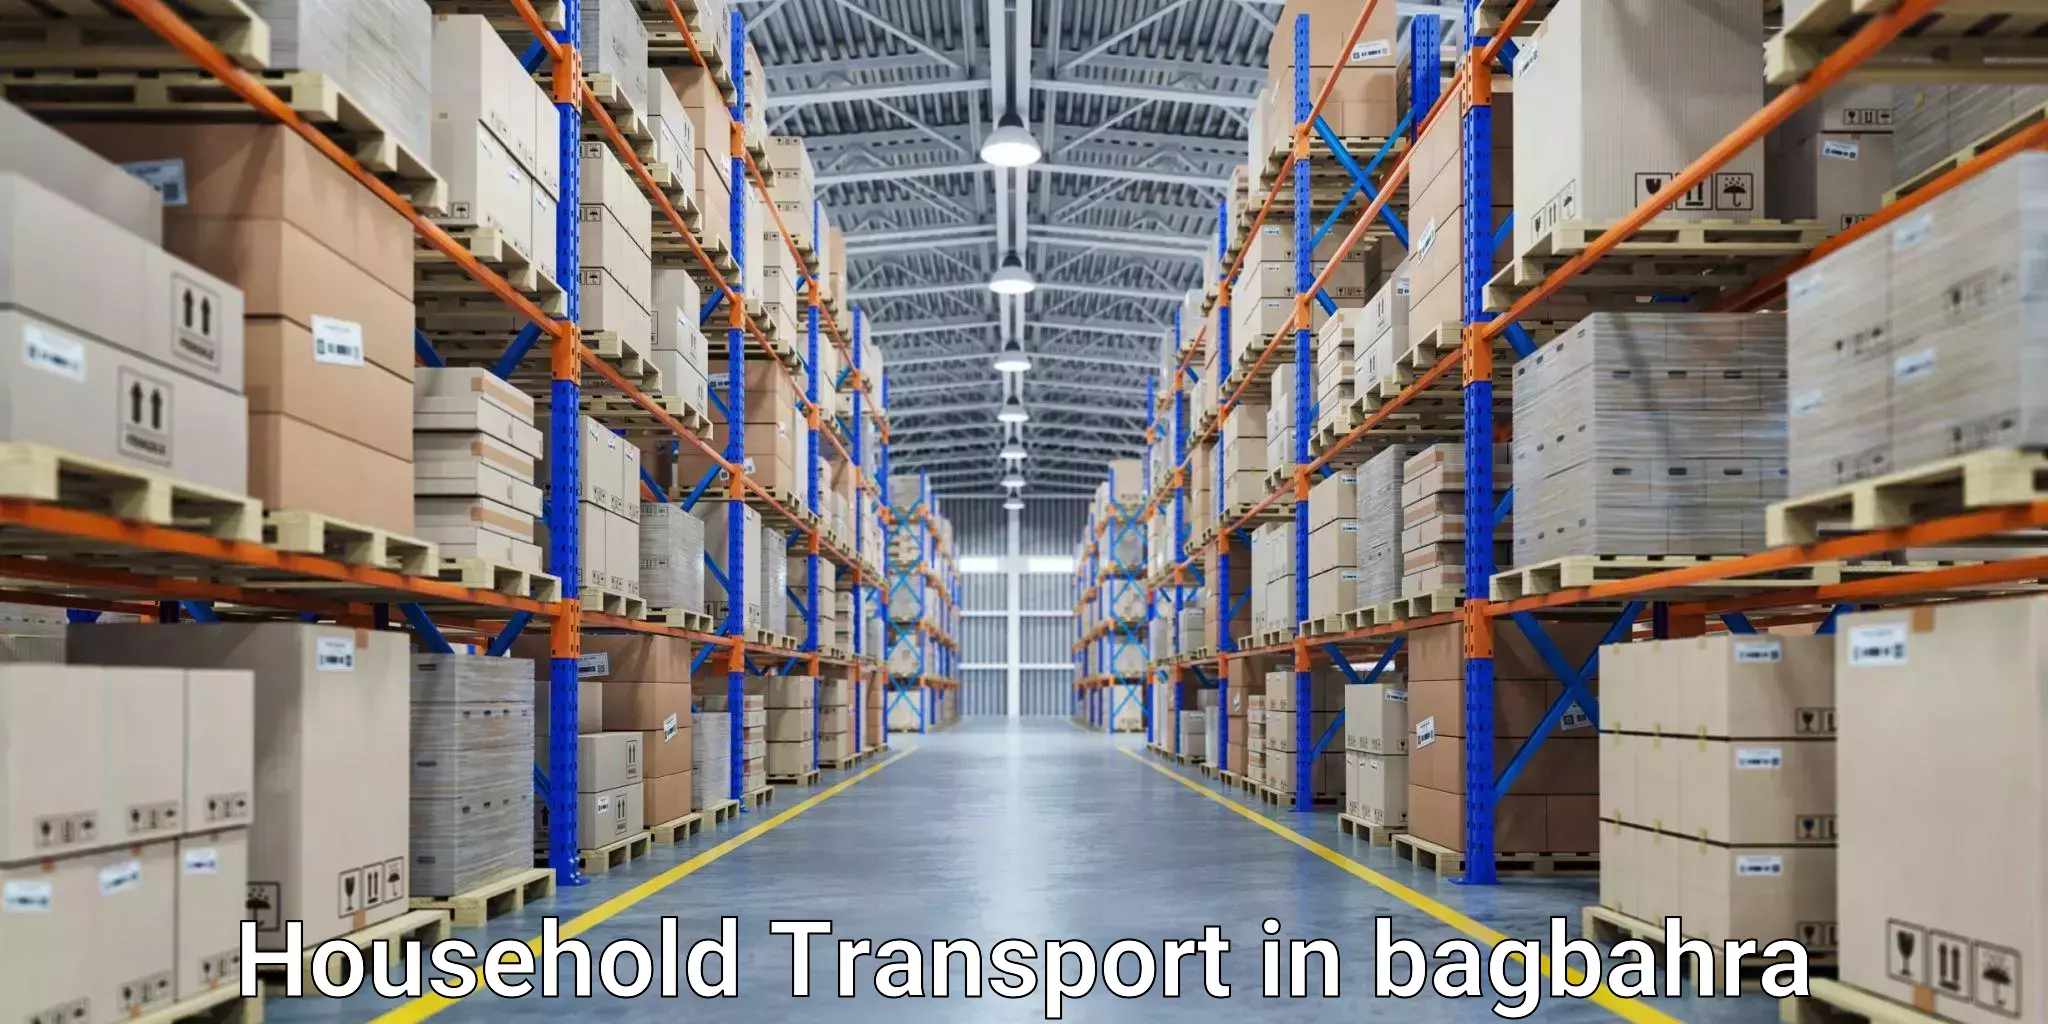 Trusted furniture transport in bagbahra